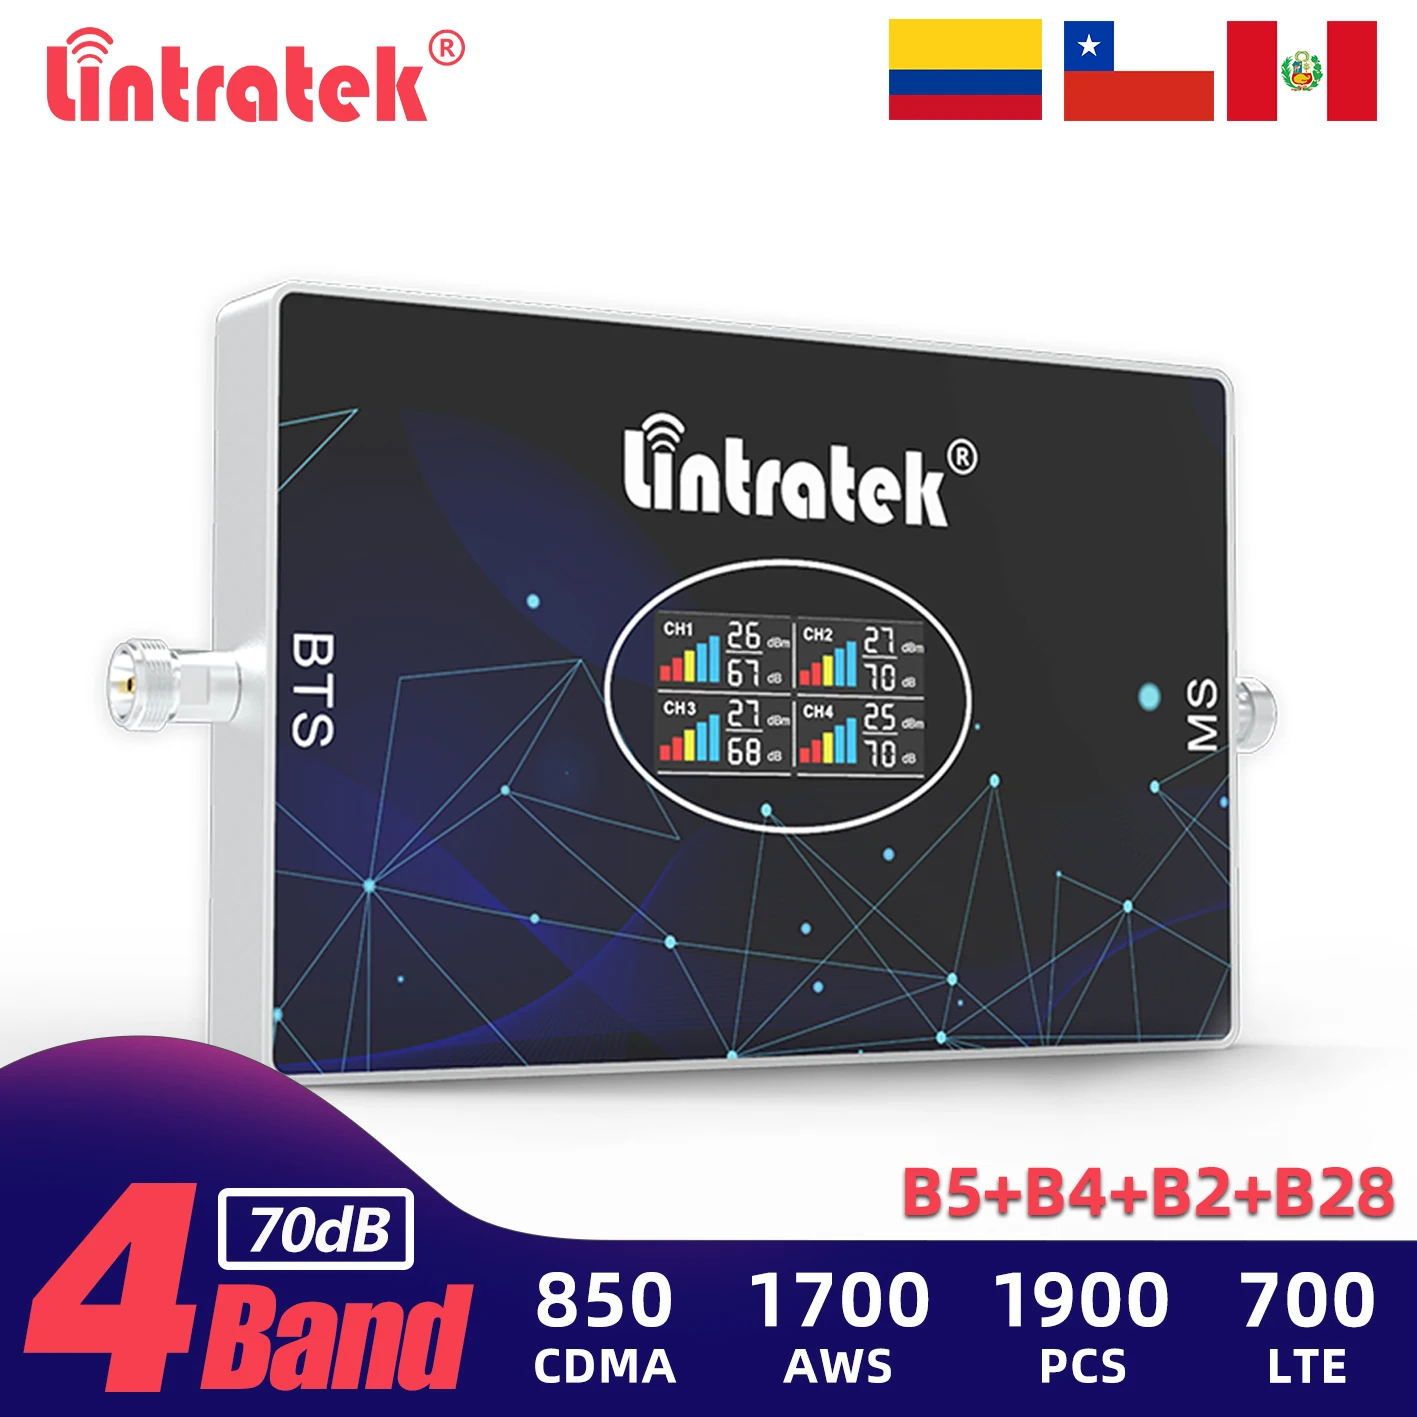 Lintratek Four-Band Signal Repeater 850 700 1900 1700 Band 28 Cellular Booster 2G GSM 3G 4G LTE Cell Phone Network Amplifier 5 band mobile network booster 2g 3g 4g 5g lte signal for cell phone cellular repeater amplifier